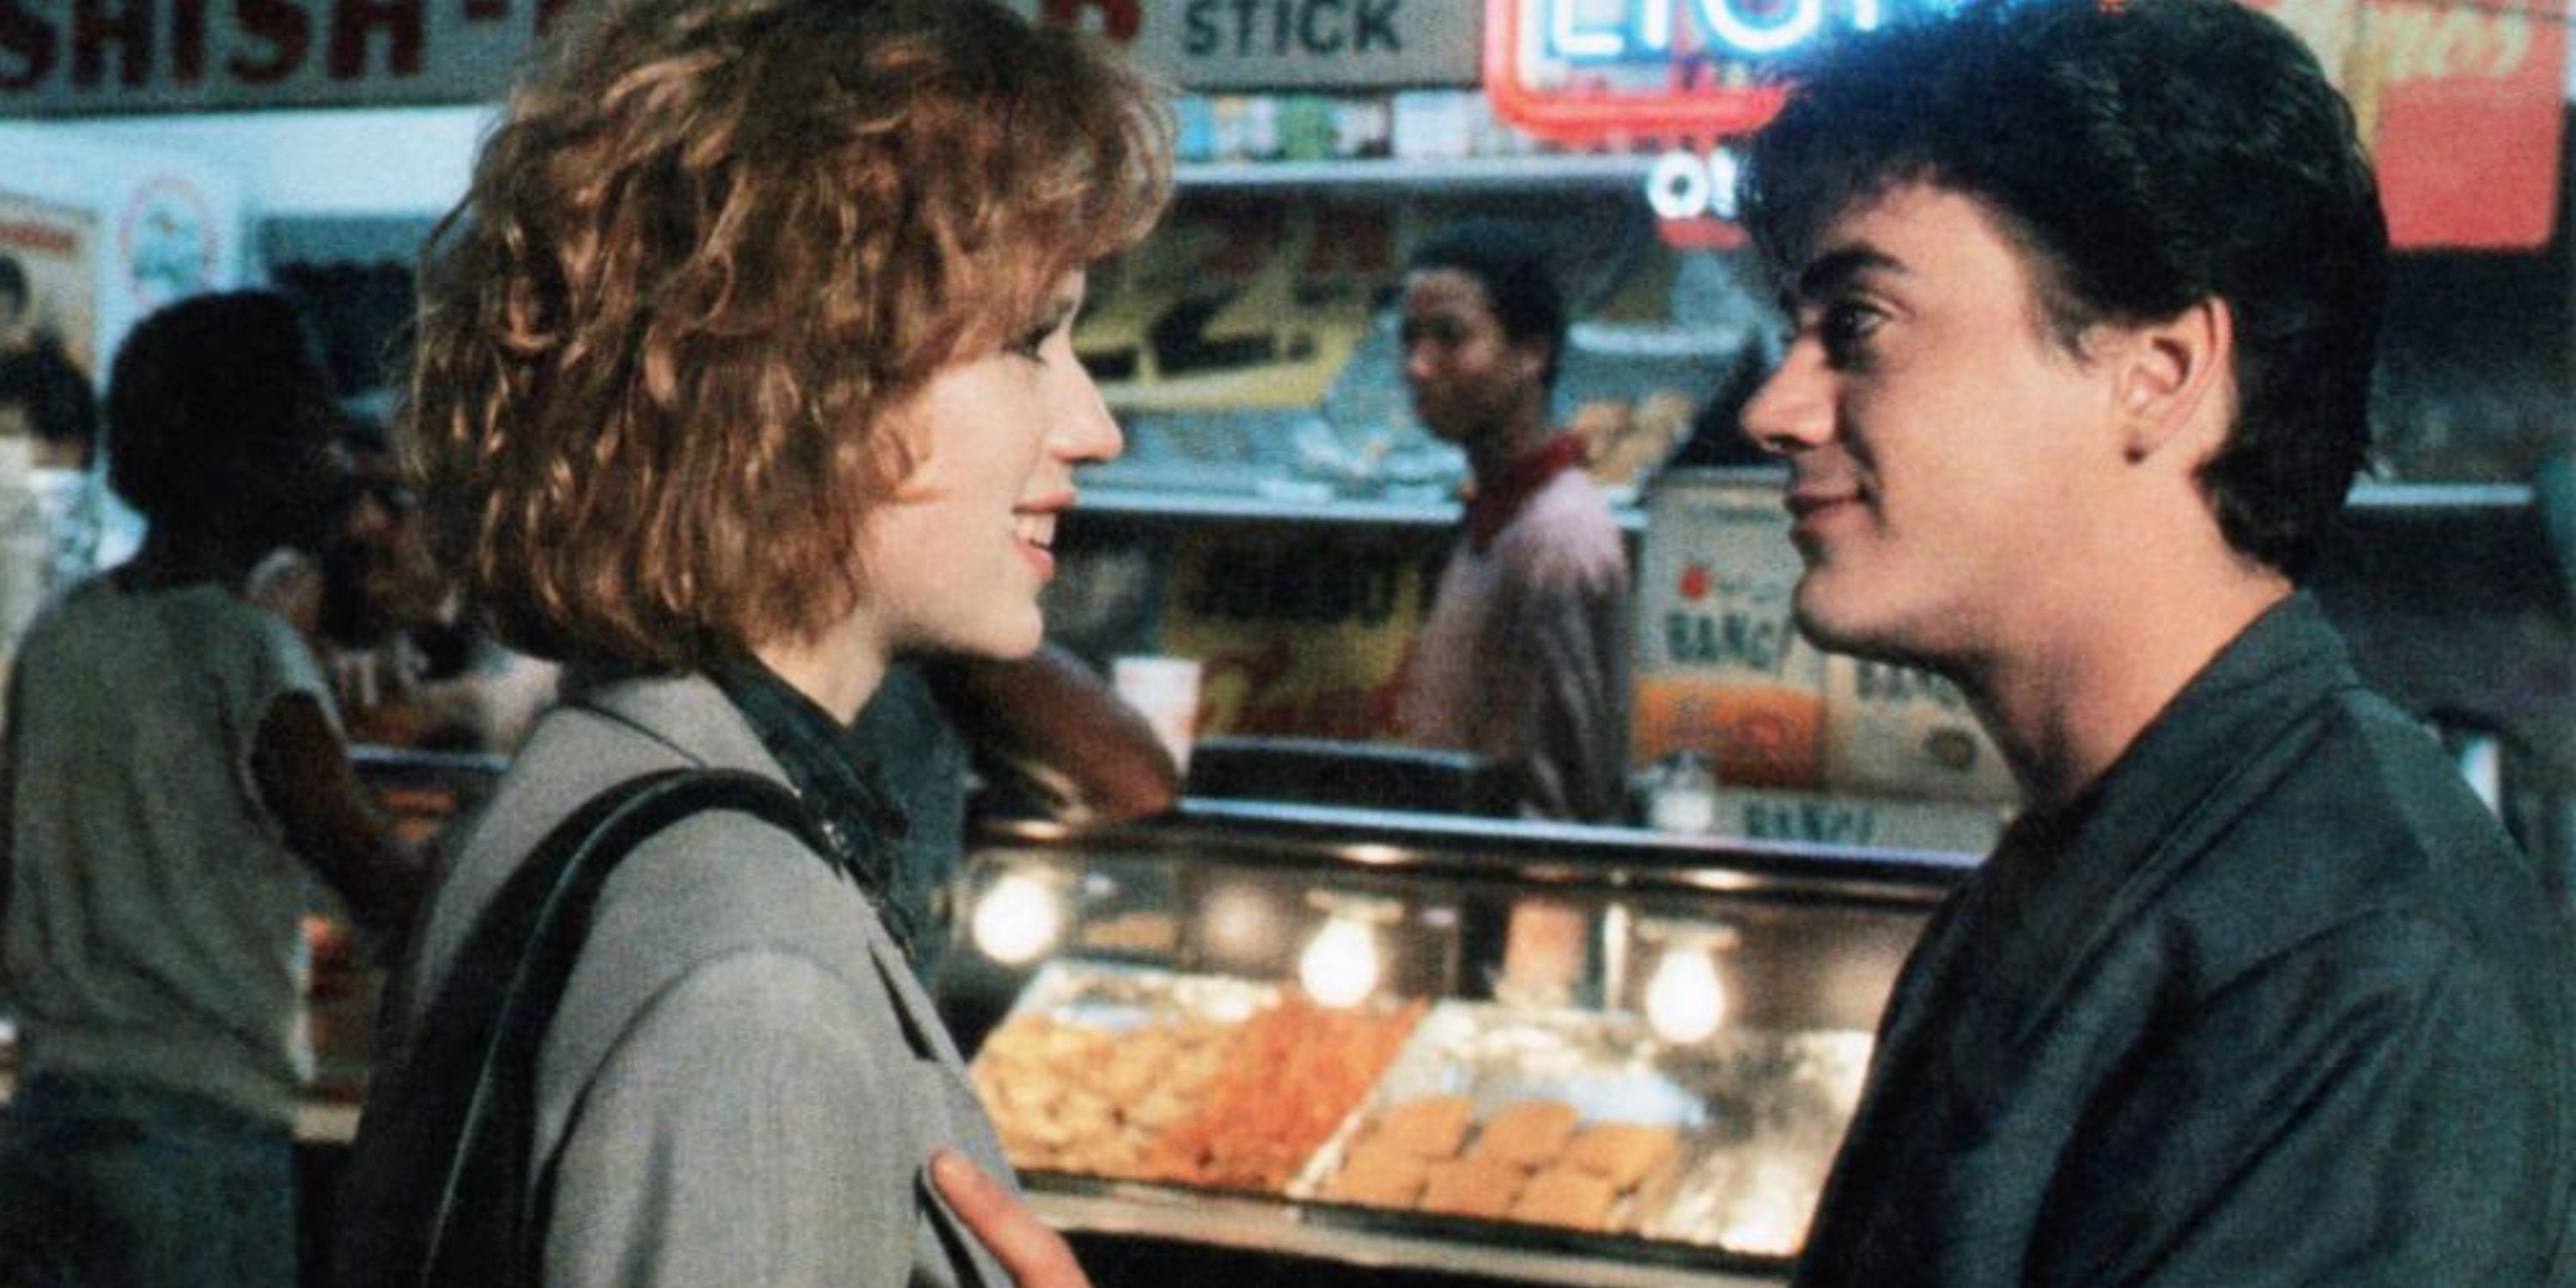 10 Best Brat Pack Movies - Molly Ringwald and Robert Downey Jr.  pickup artist played by actors.